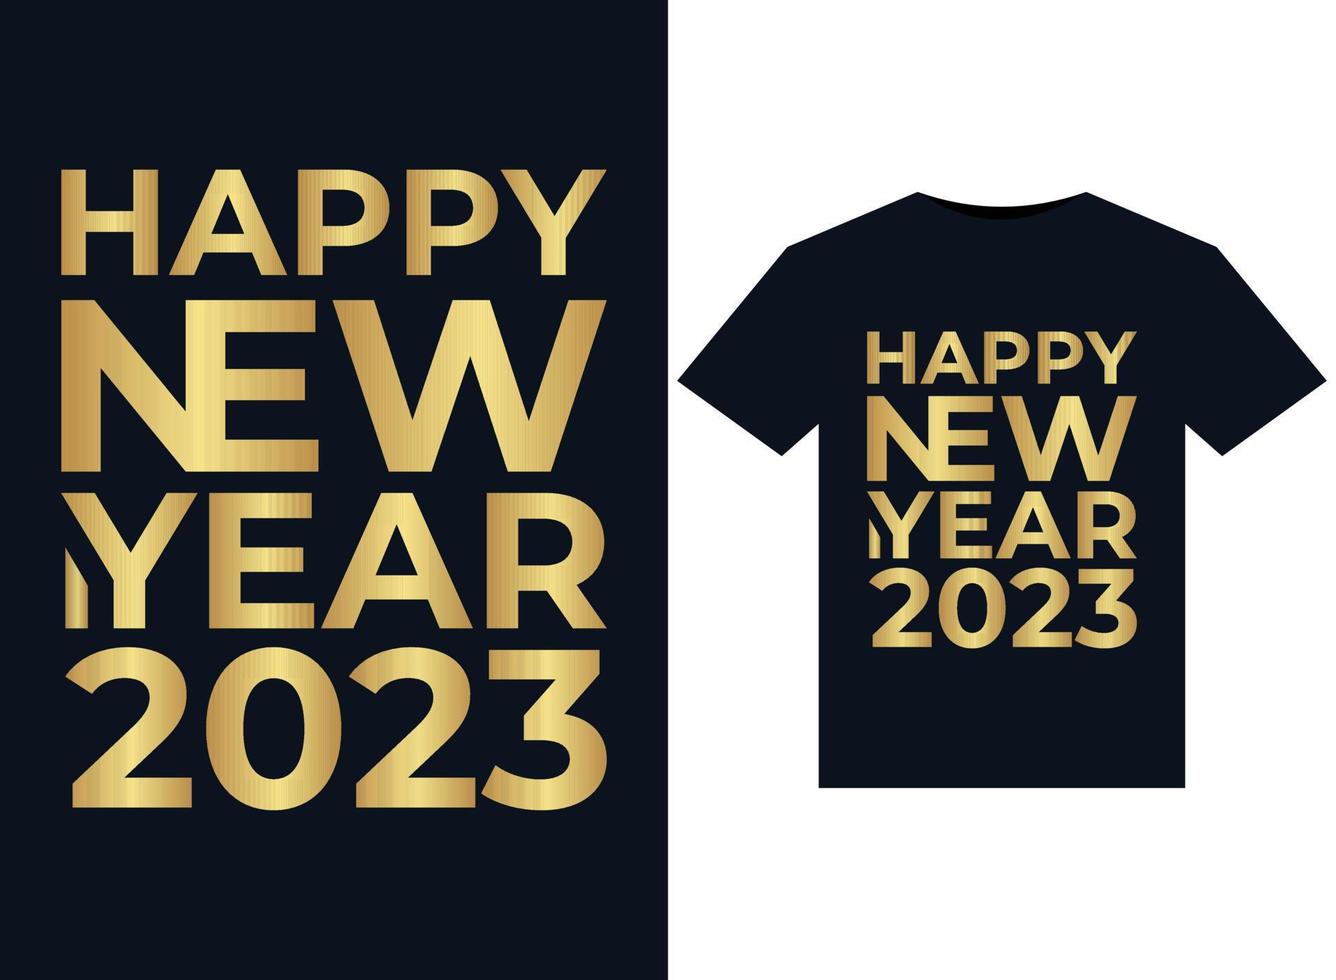 Happy New Year 2023 illustrations for print-ready T-Shirts design vector